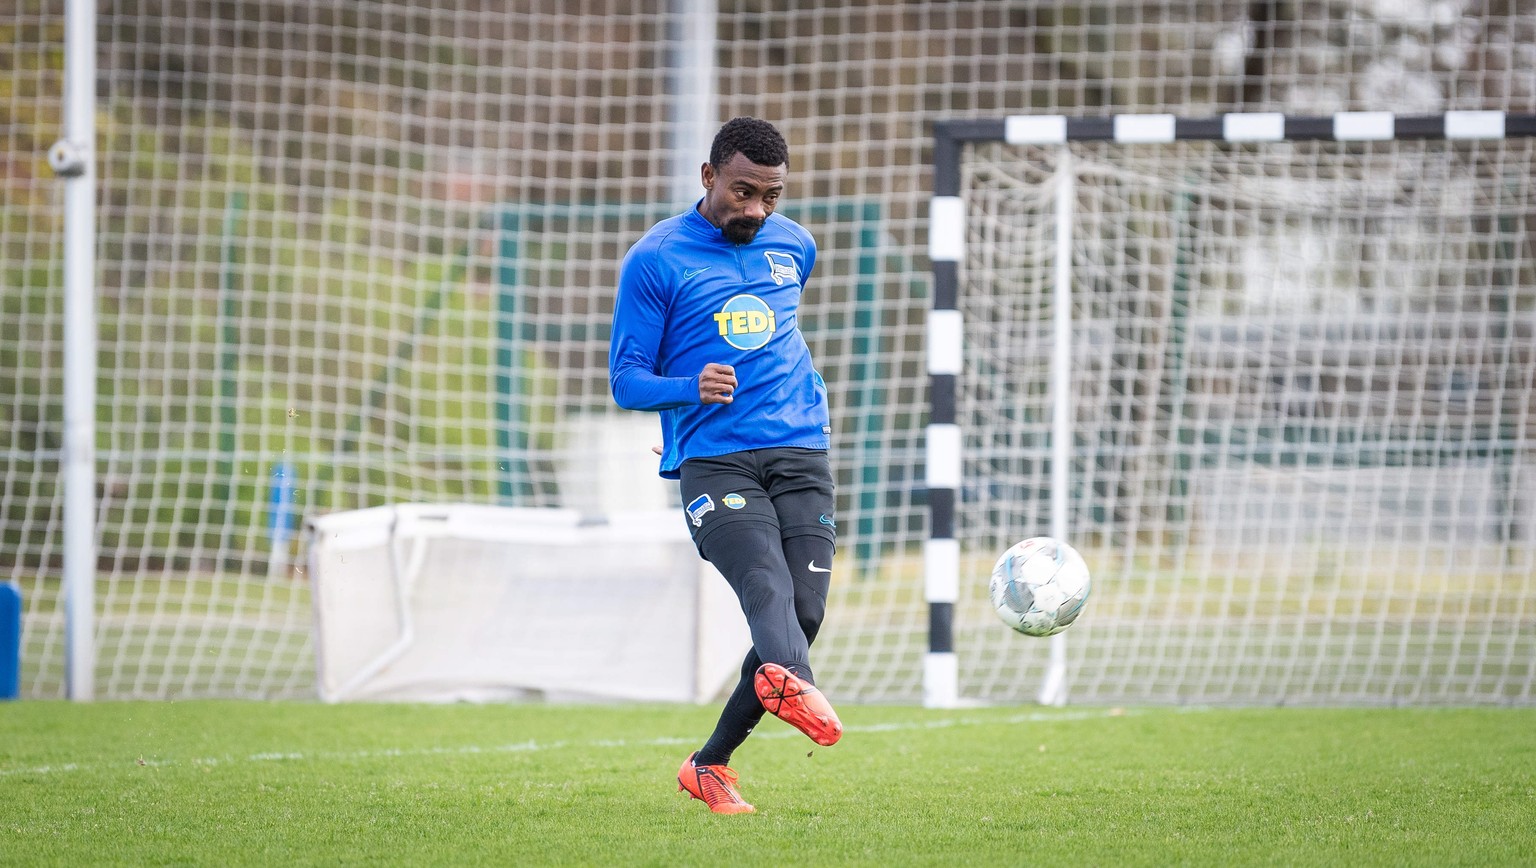 epa08360954 A handout photo made available by Hertha BSC via City-Press GmbH shows Salomon Kalou of German Bundesliga soccer team Hertha BSC during a training session in Berlin, Germany, 13 April 2020 ...